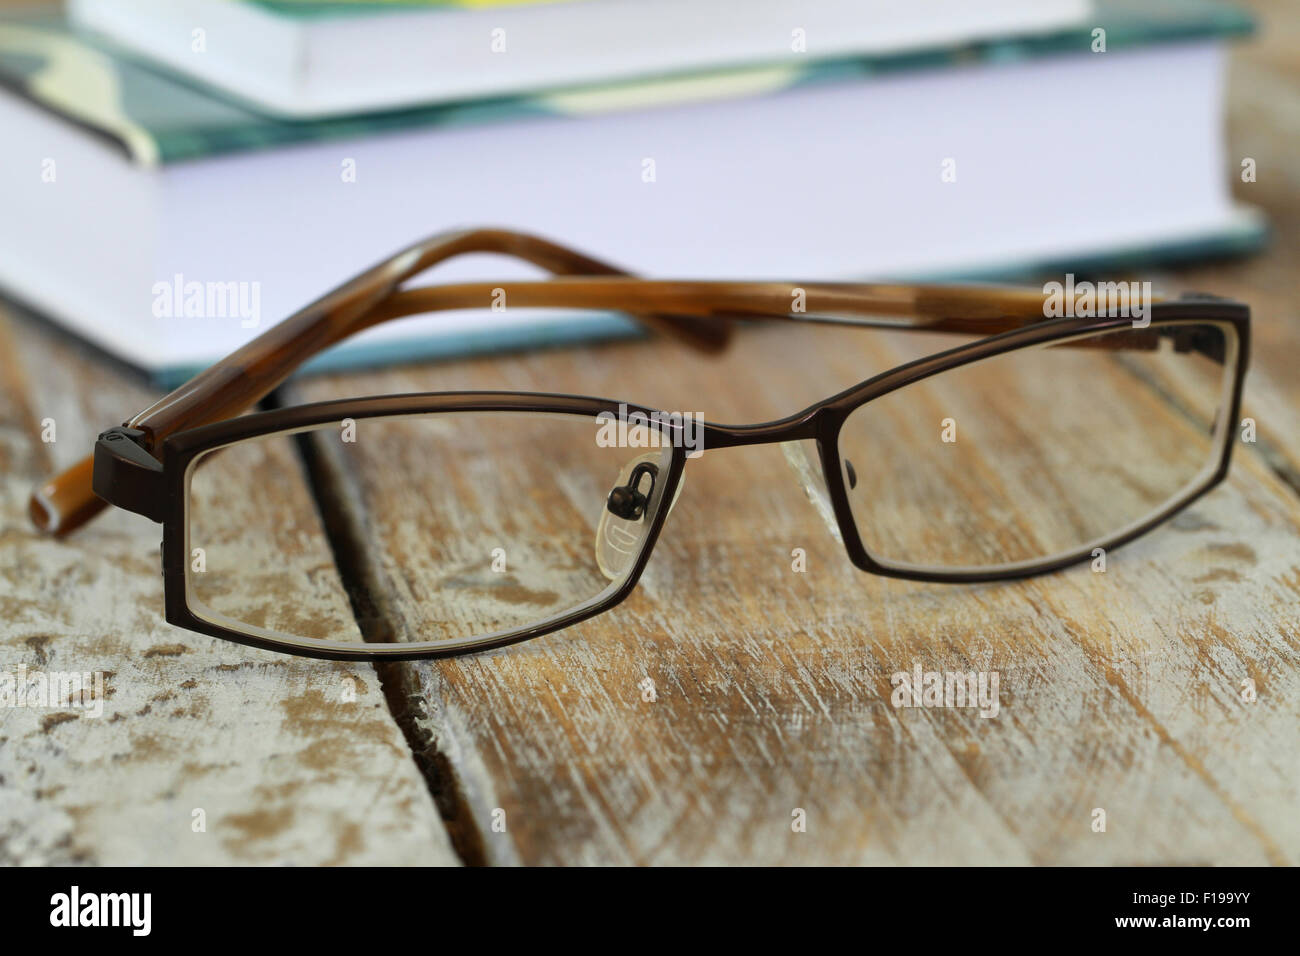 Glasses with stack of books in the background Stock Photo